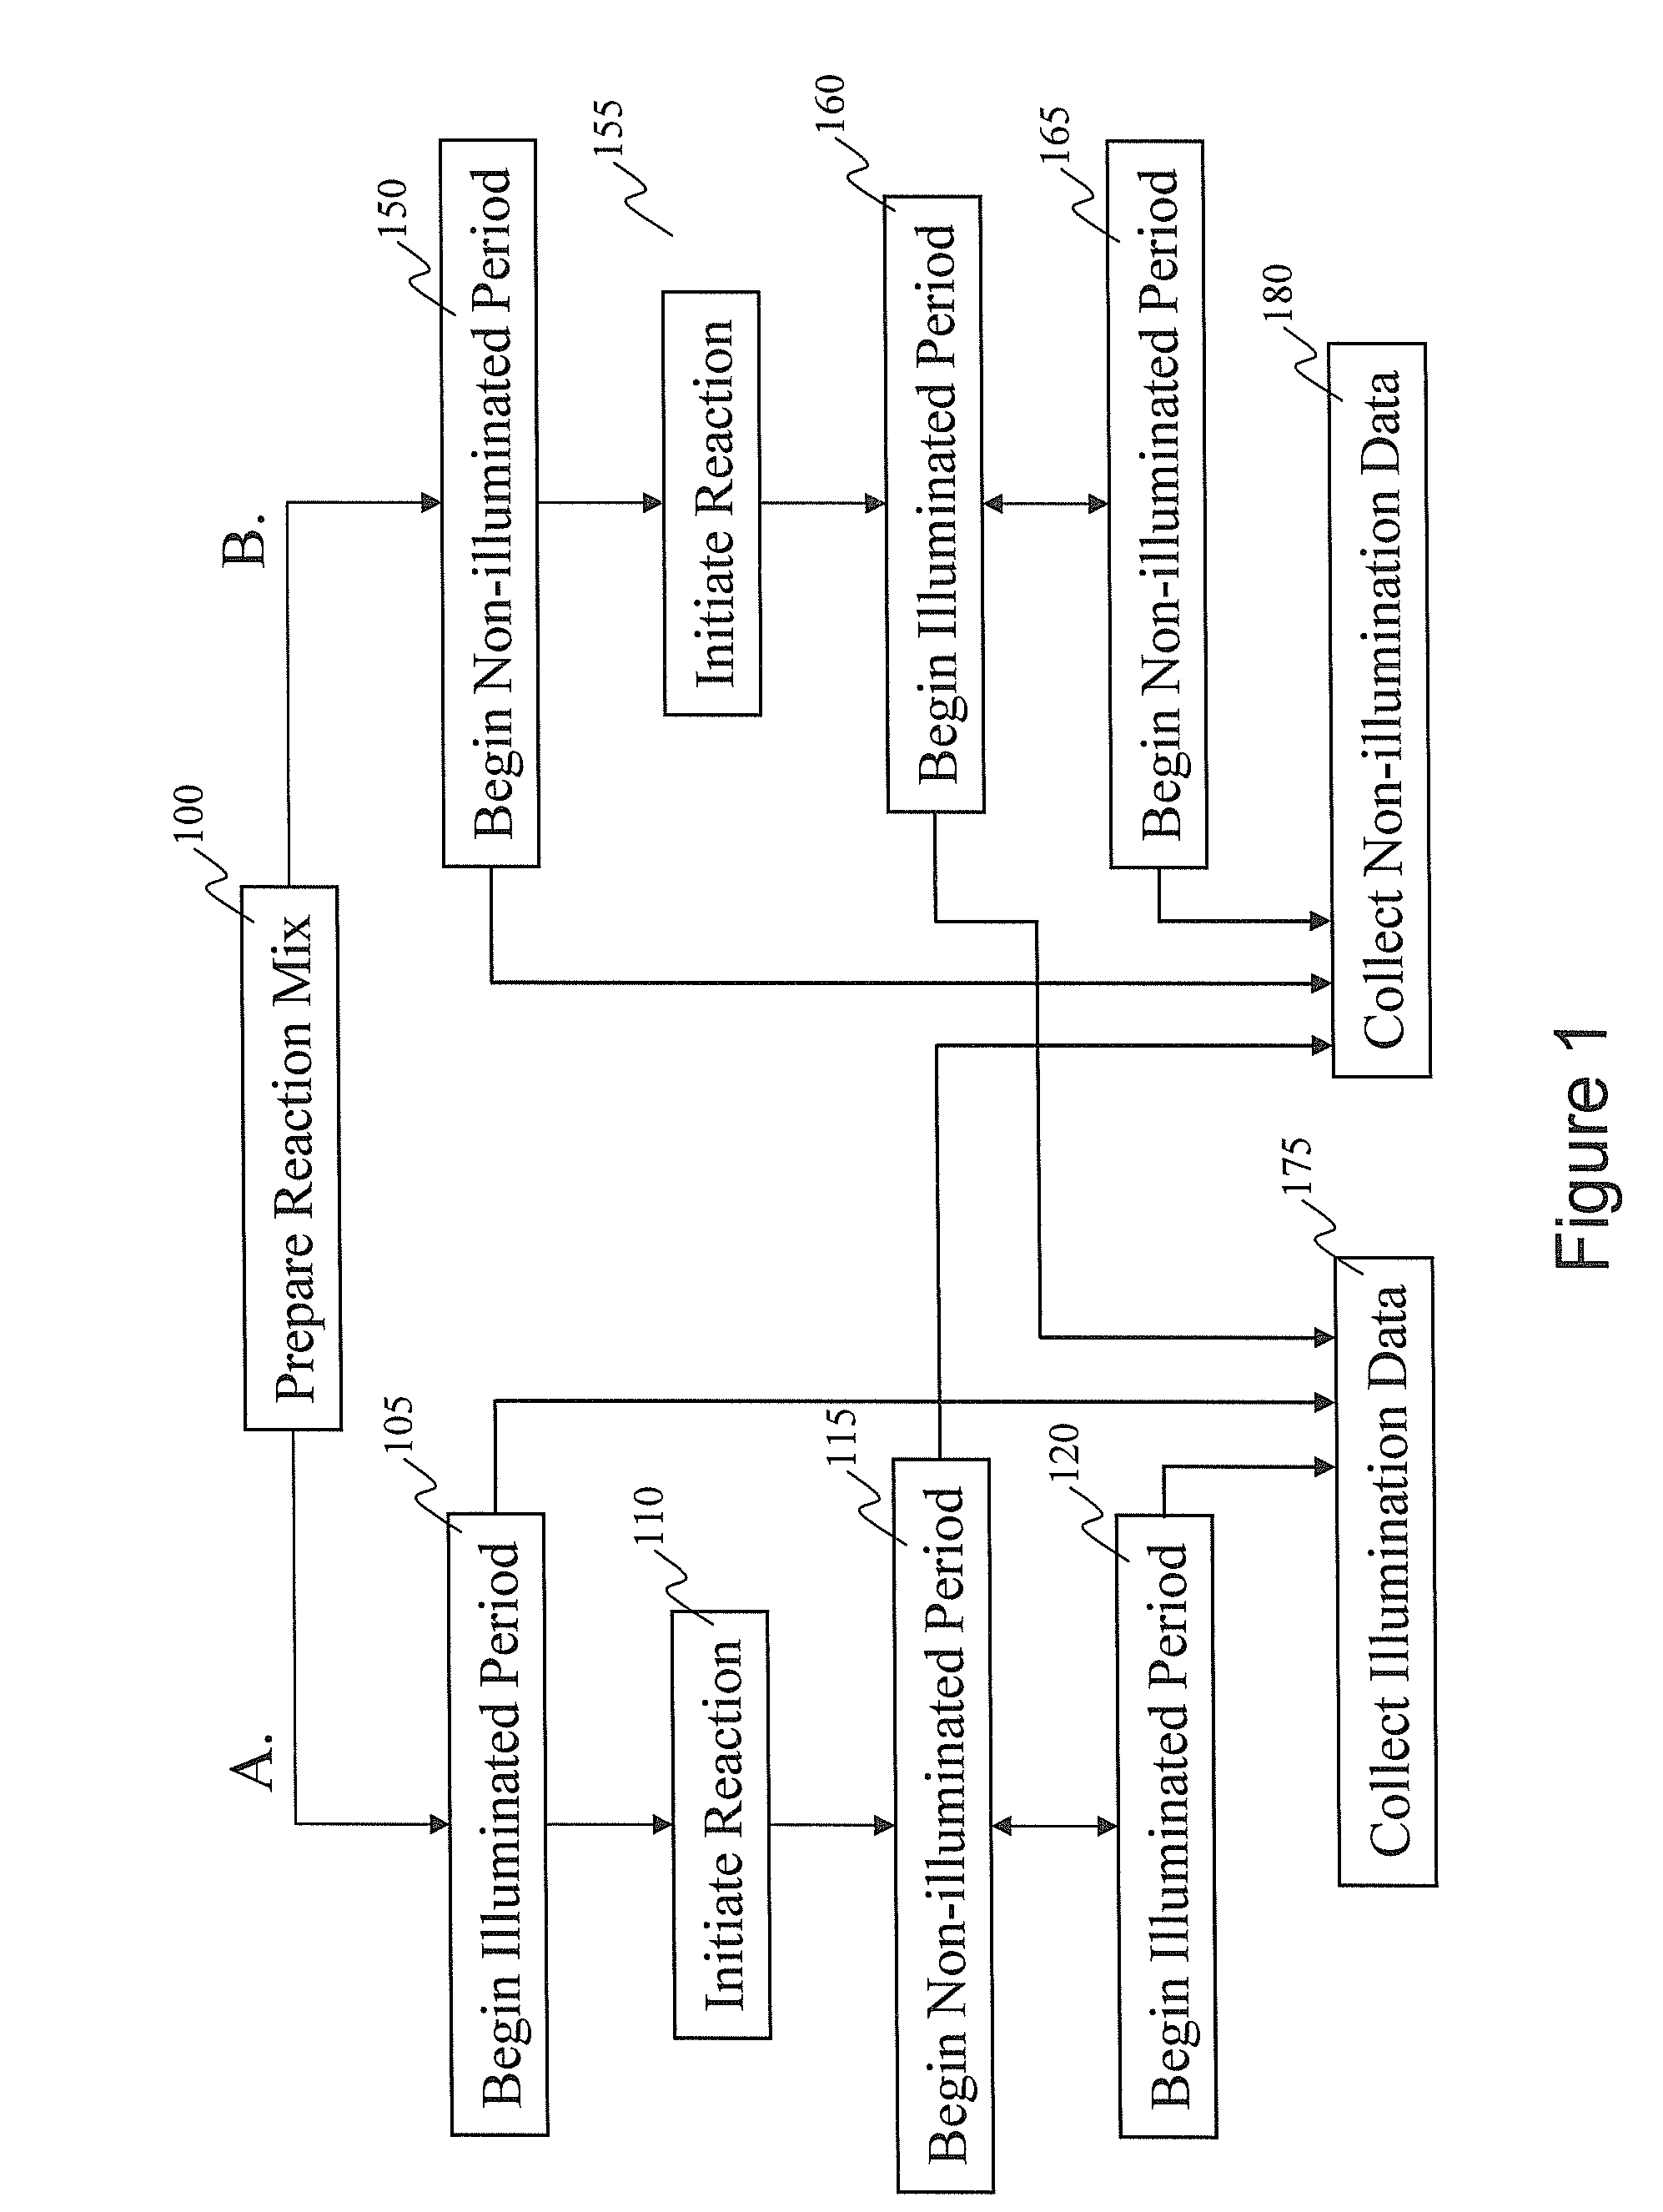 Intermittent detection during analytical reactions